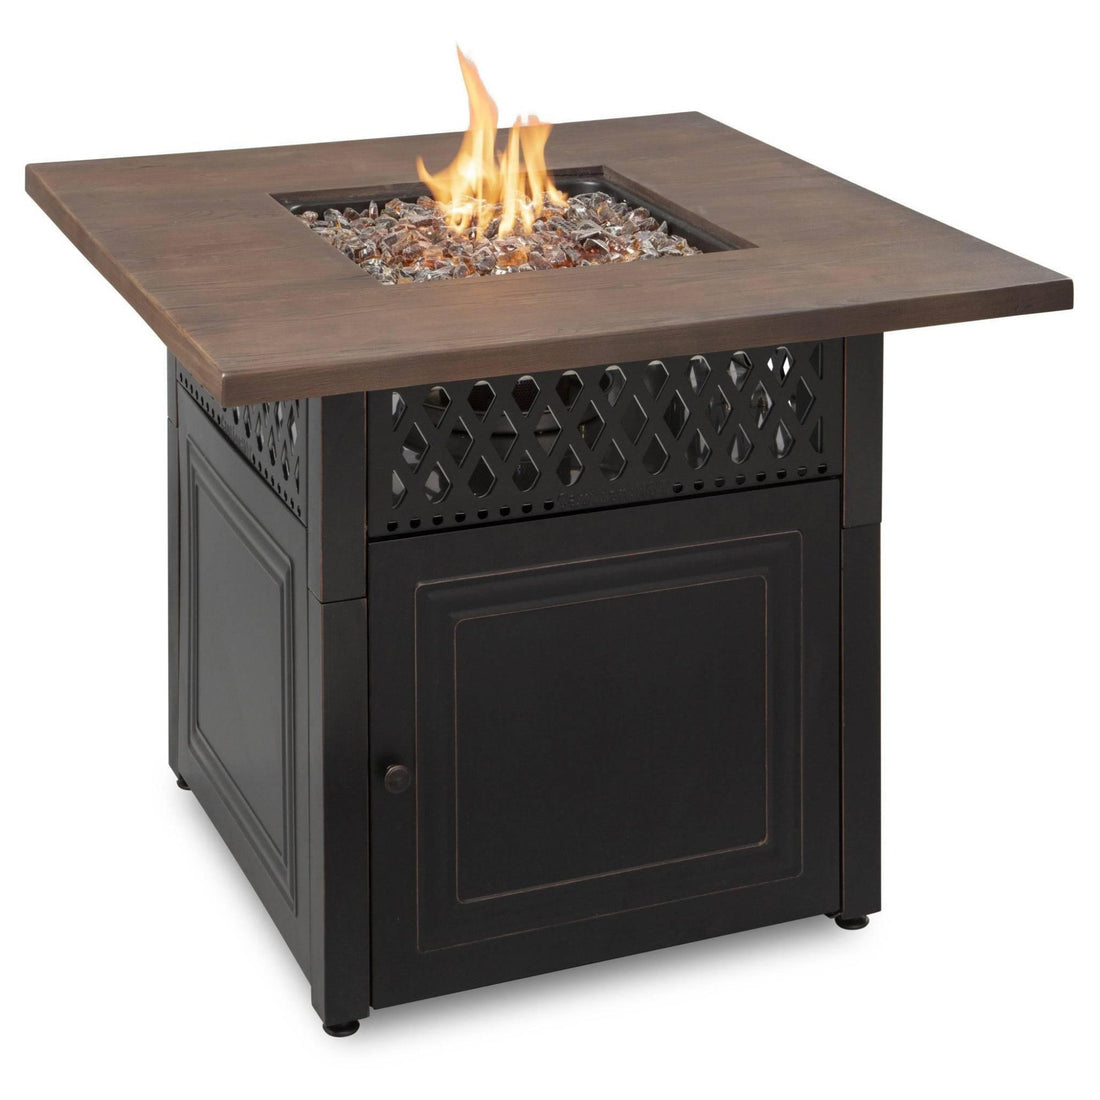 Gas vs Wood Fire Pit: Which Option is Best for You? - Kozy Korner Fire Pits